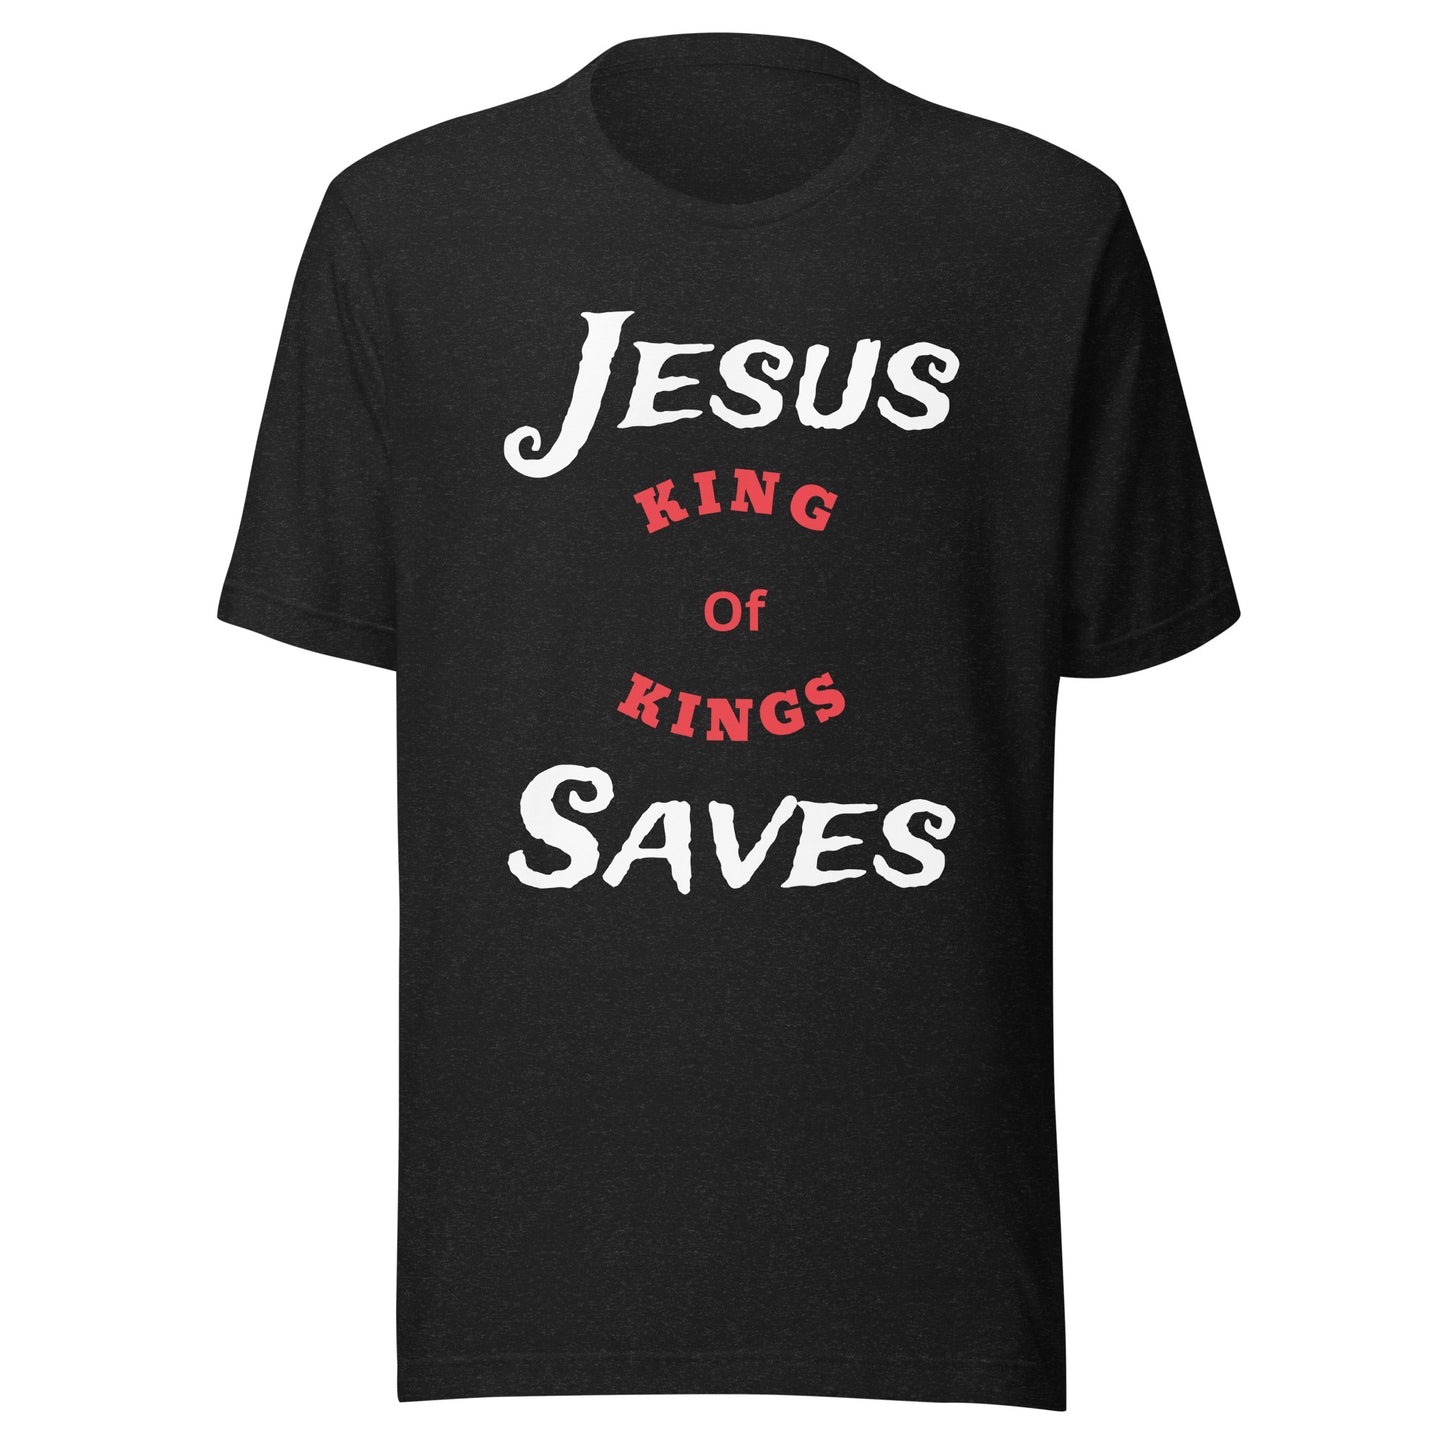 Acts 4:12 T-Shirt